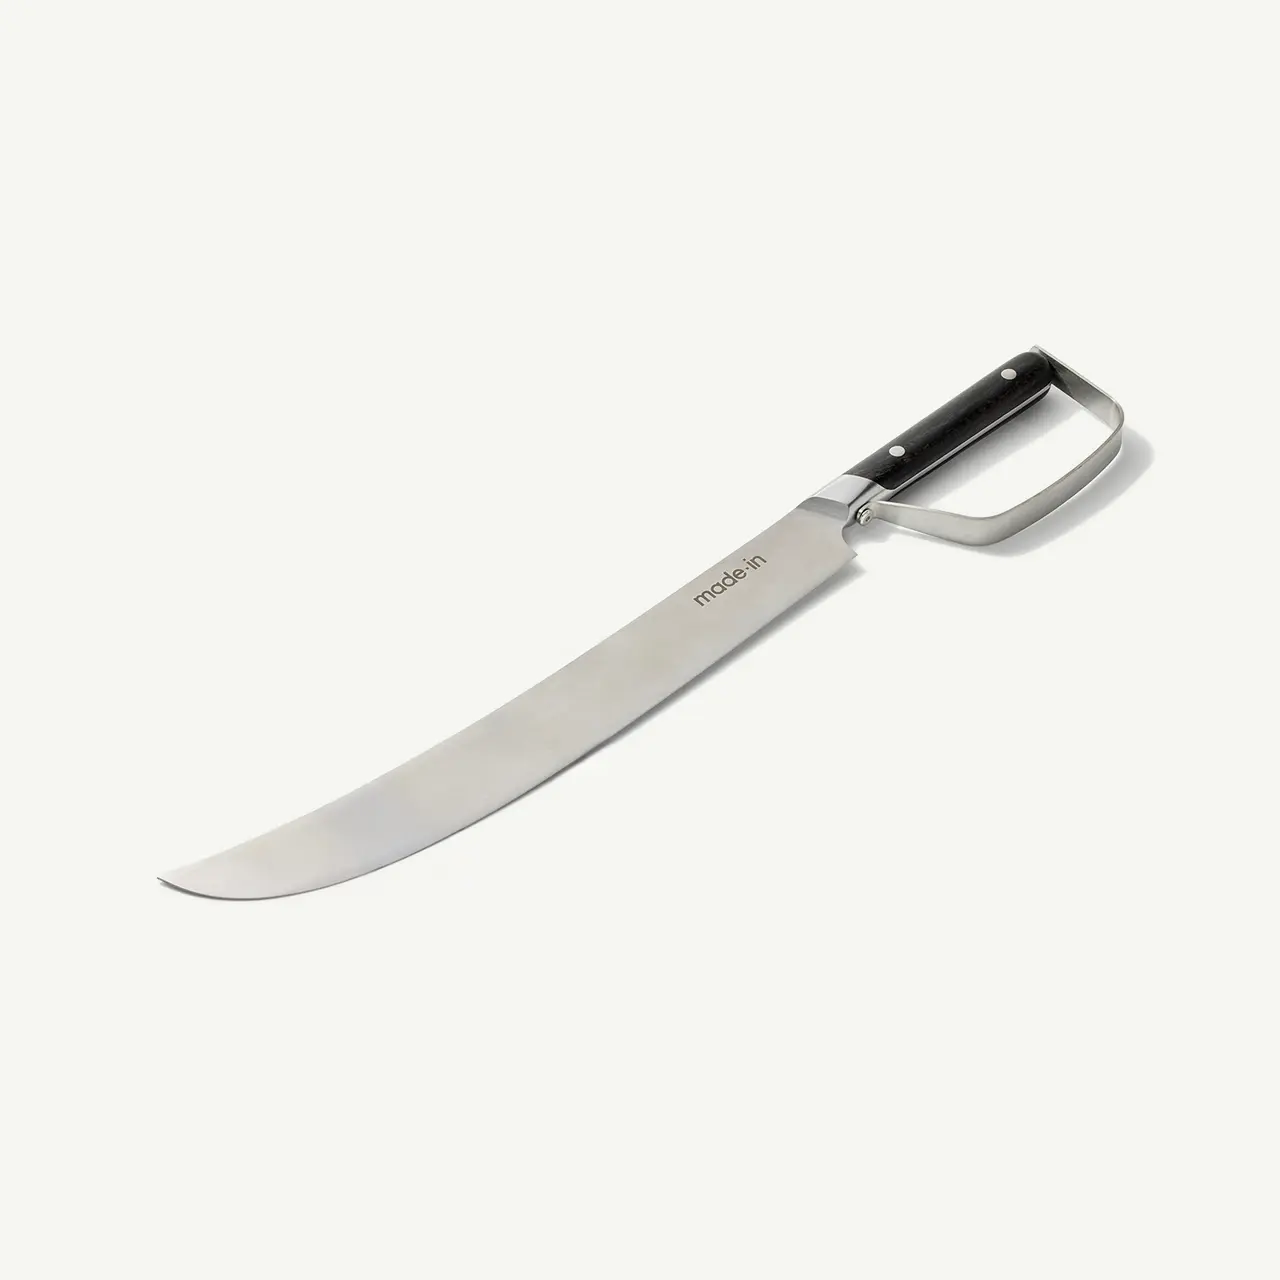 A stainless steel kitchen knife with a curved blade and a black handle lies on a white surface.